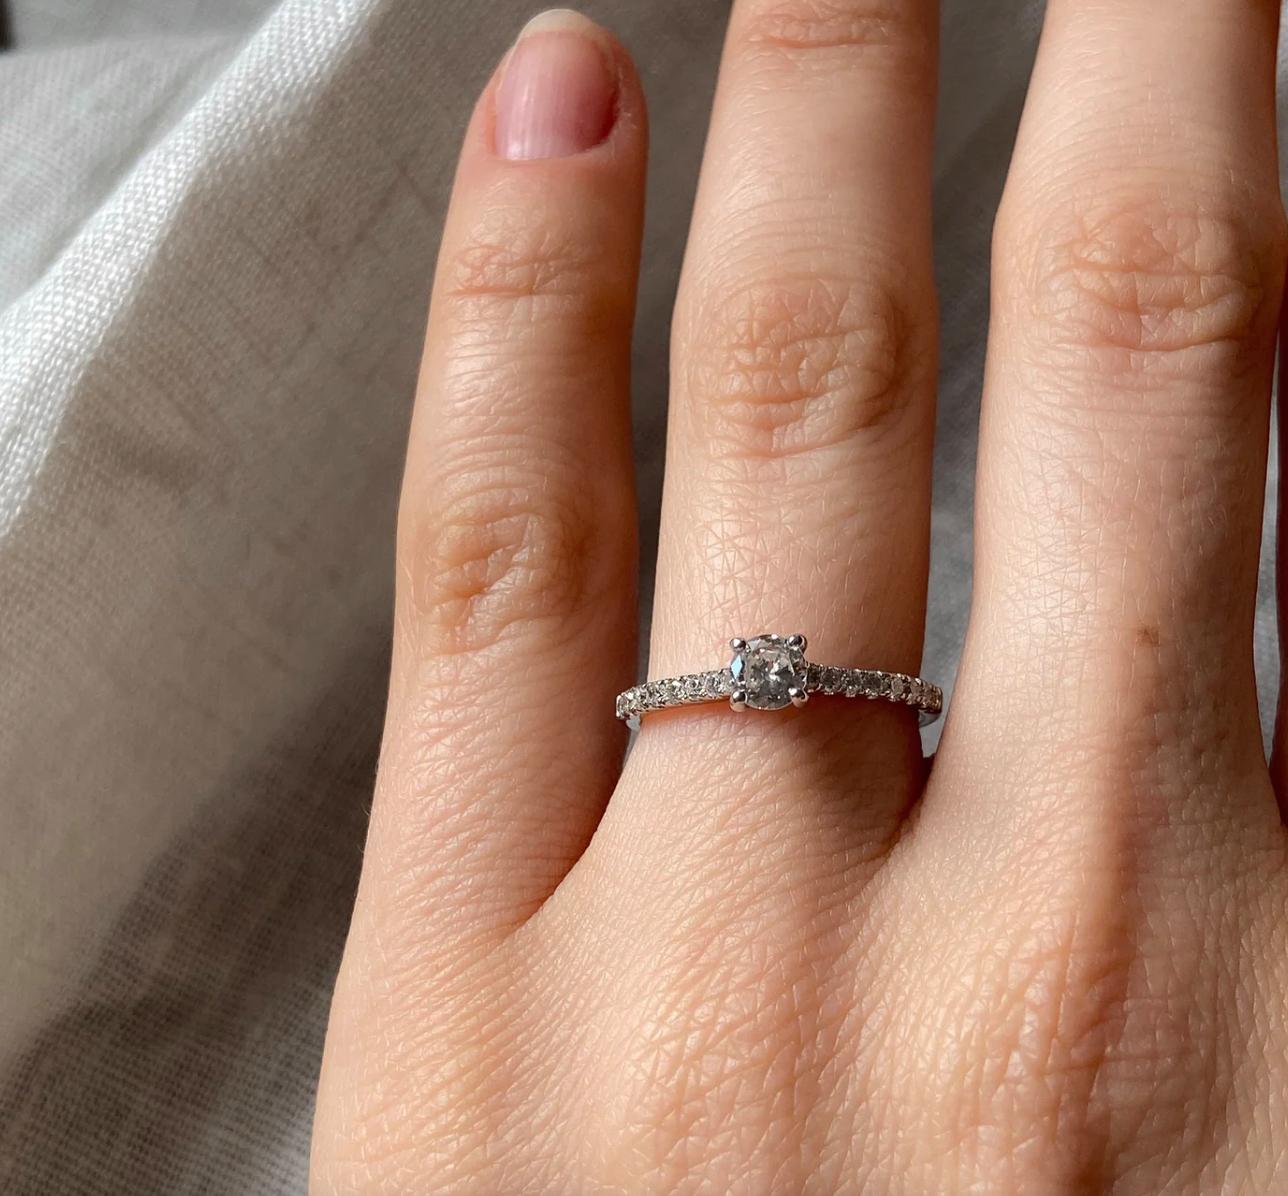 A truly classic solitaire diamond engagement ring, with an approximate 0.30ct brilliant cut diamond centre stone held in a minimal rounded four claw setting. There are eight brilliant cut diamonds in cut-down claw settings cascading down each